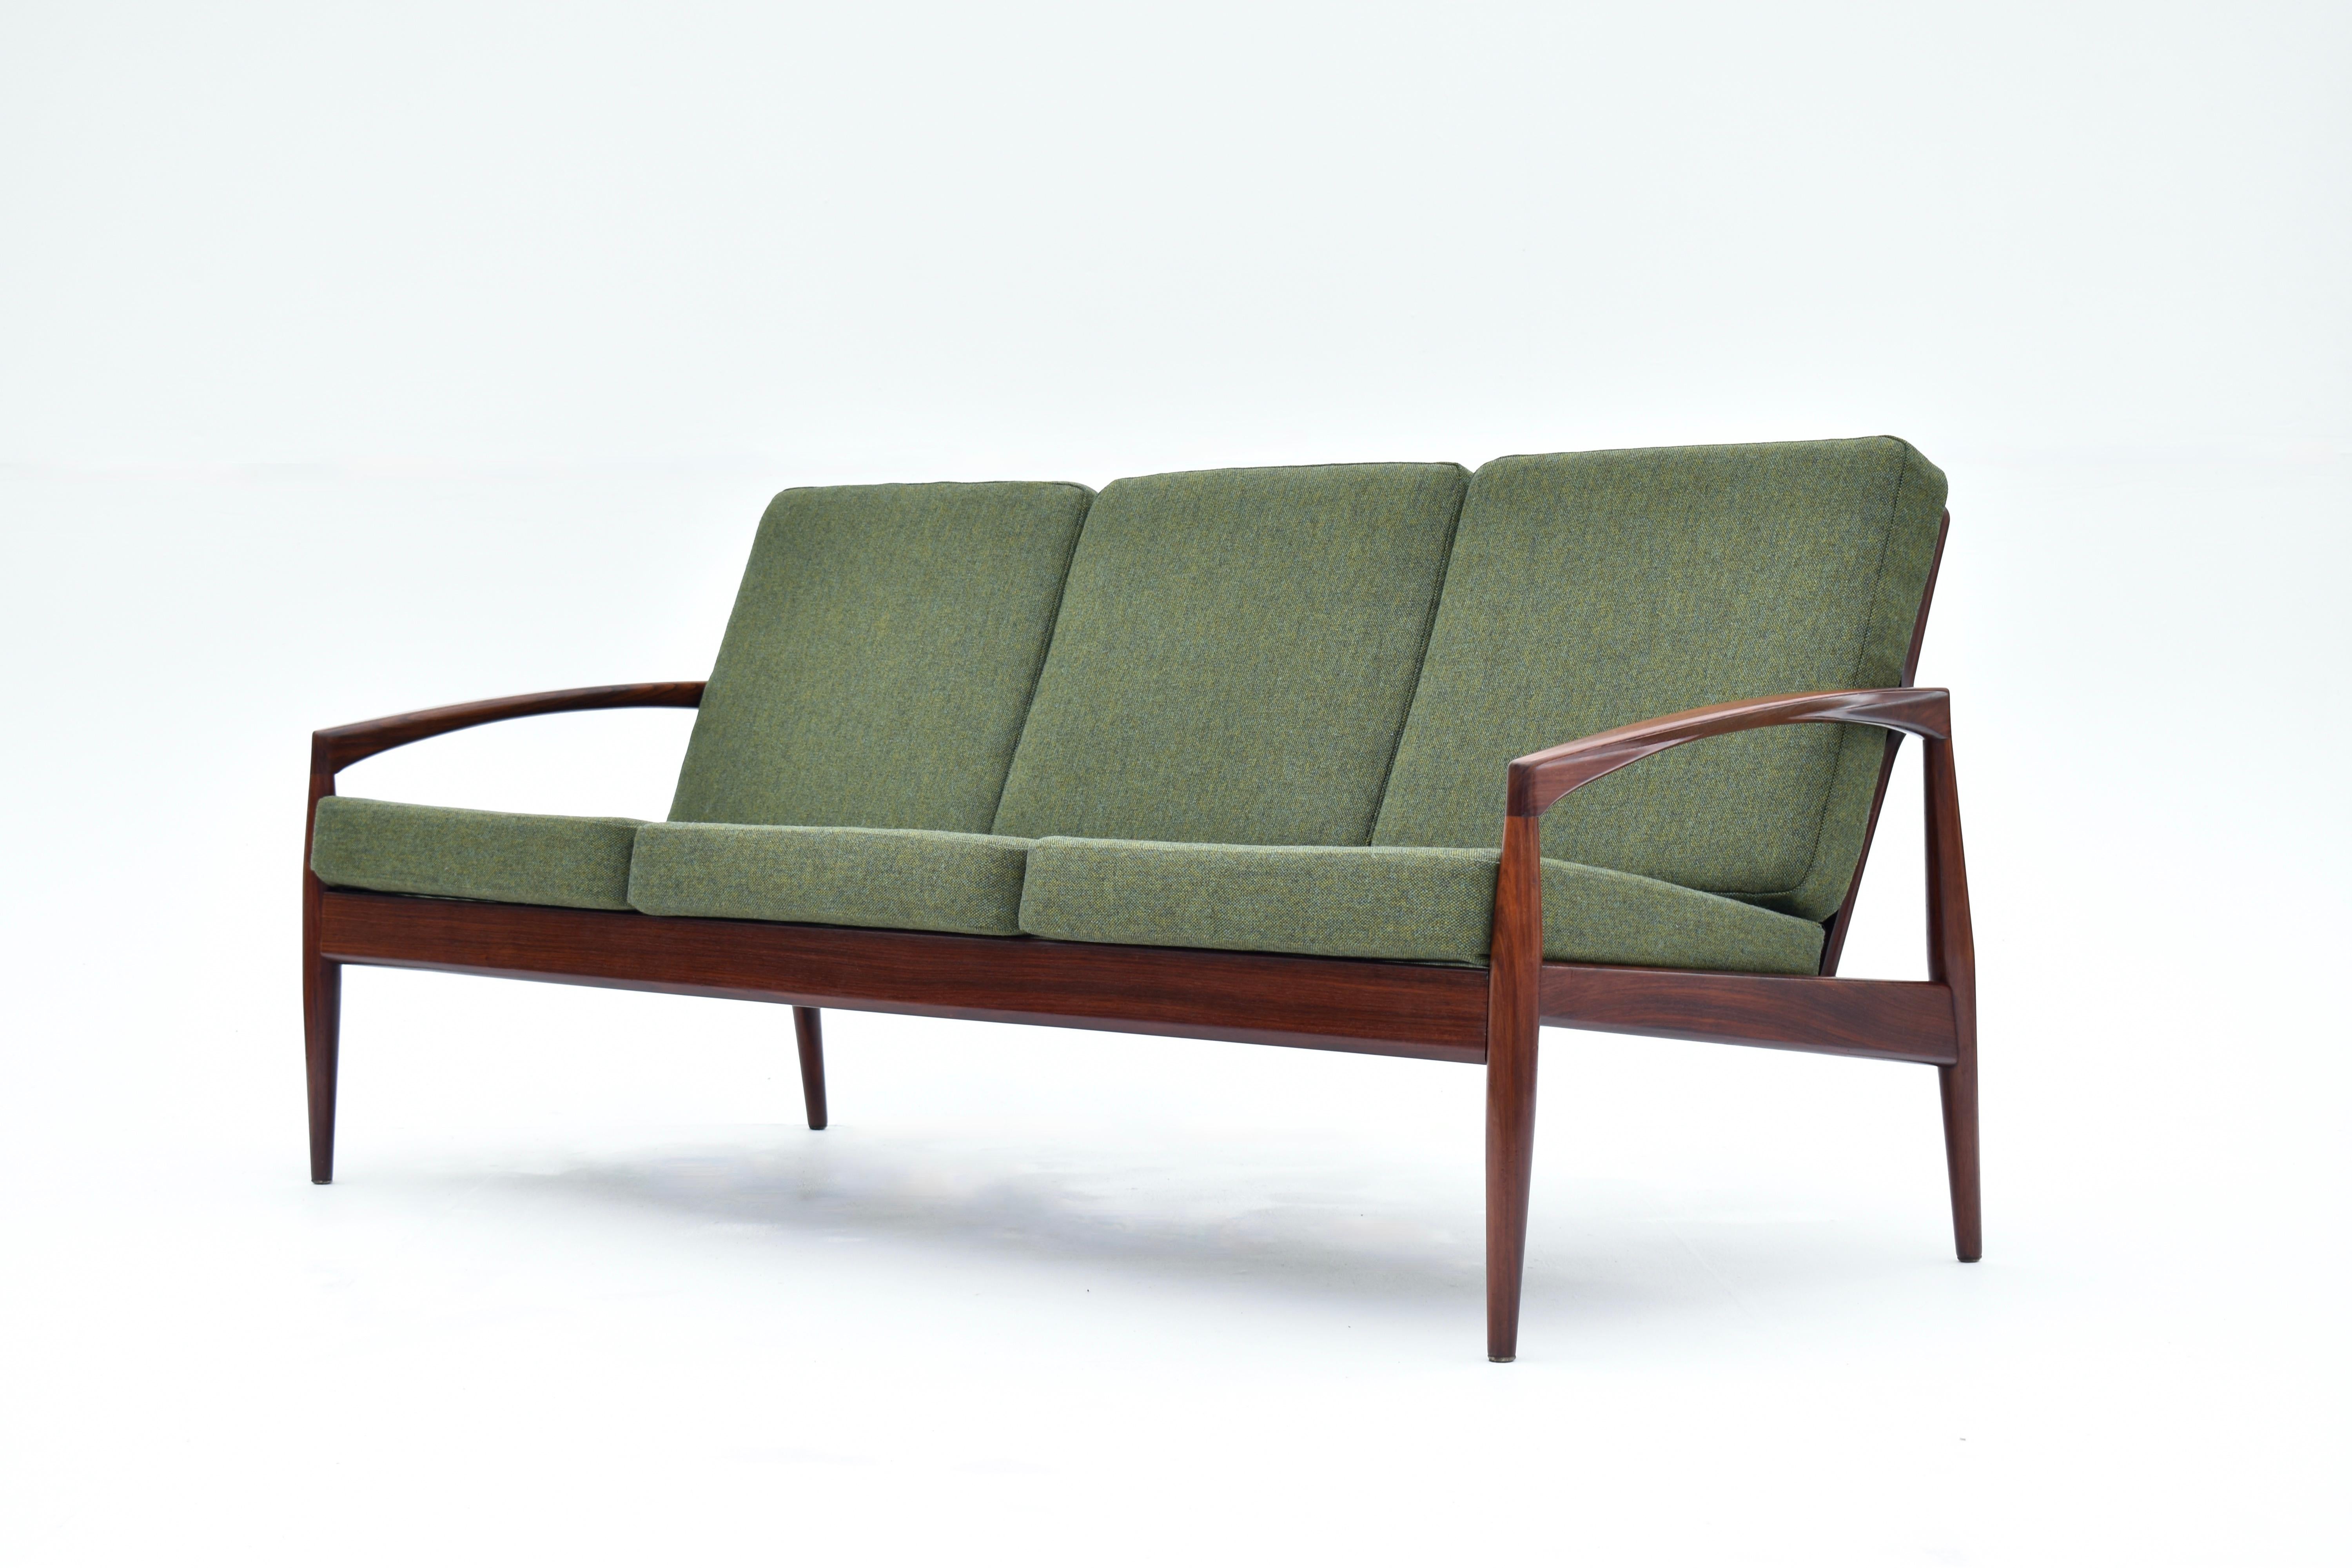 A very rarely seen ‘Paper Knife’ sofa designed by Kai Kristainsen for Magnus Olesen.

Crafted from solid rosewood the frame is a sculptural masterpiece exhibiting incredible finesse and as such is recognised as one of Kai Kristiansens greatest